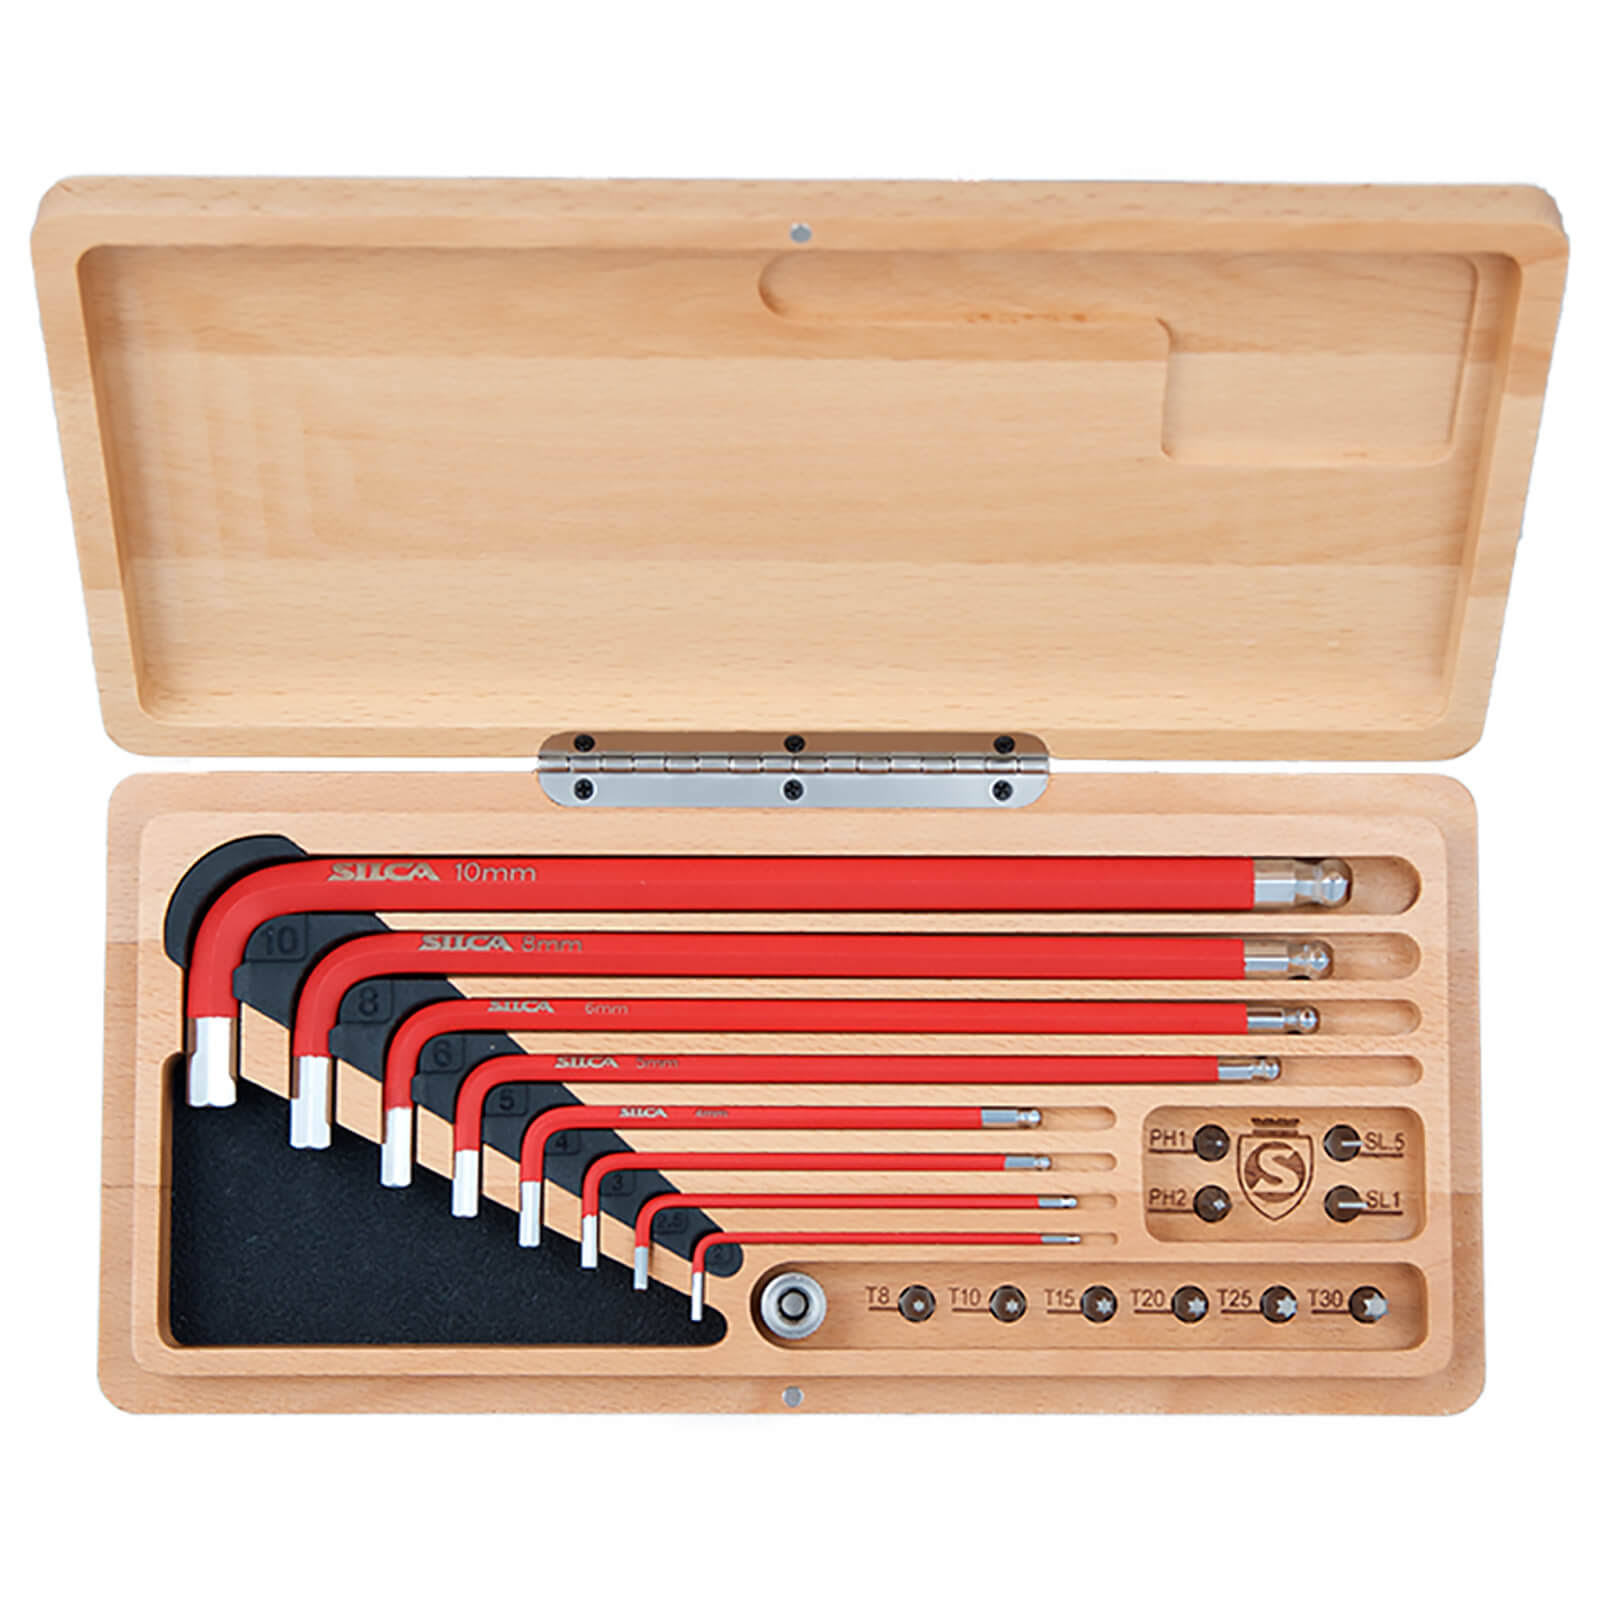 Silca Hex Wrenches and Drive Tool Kit